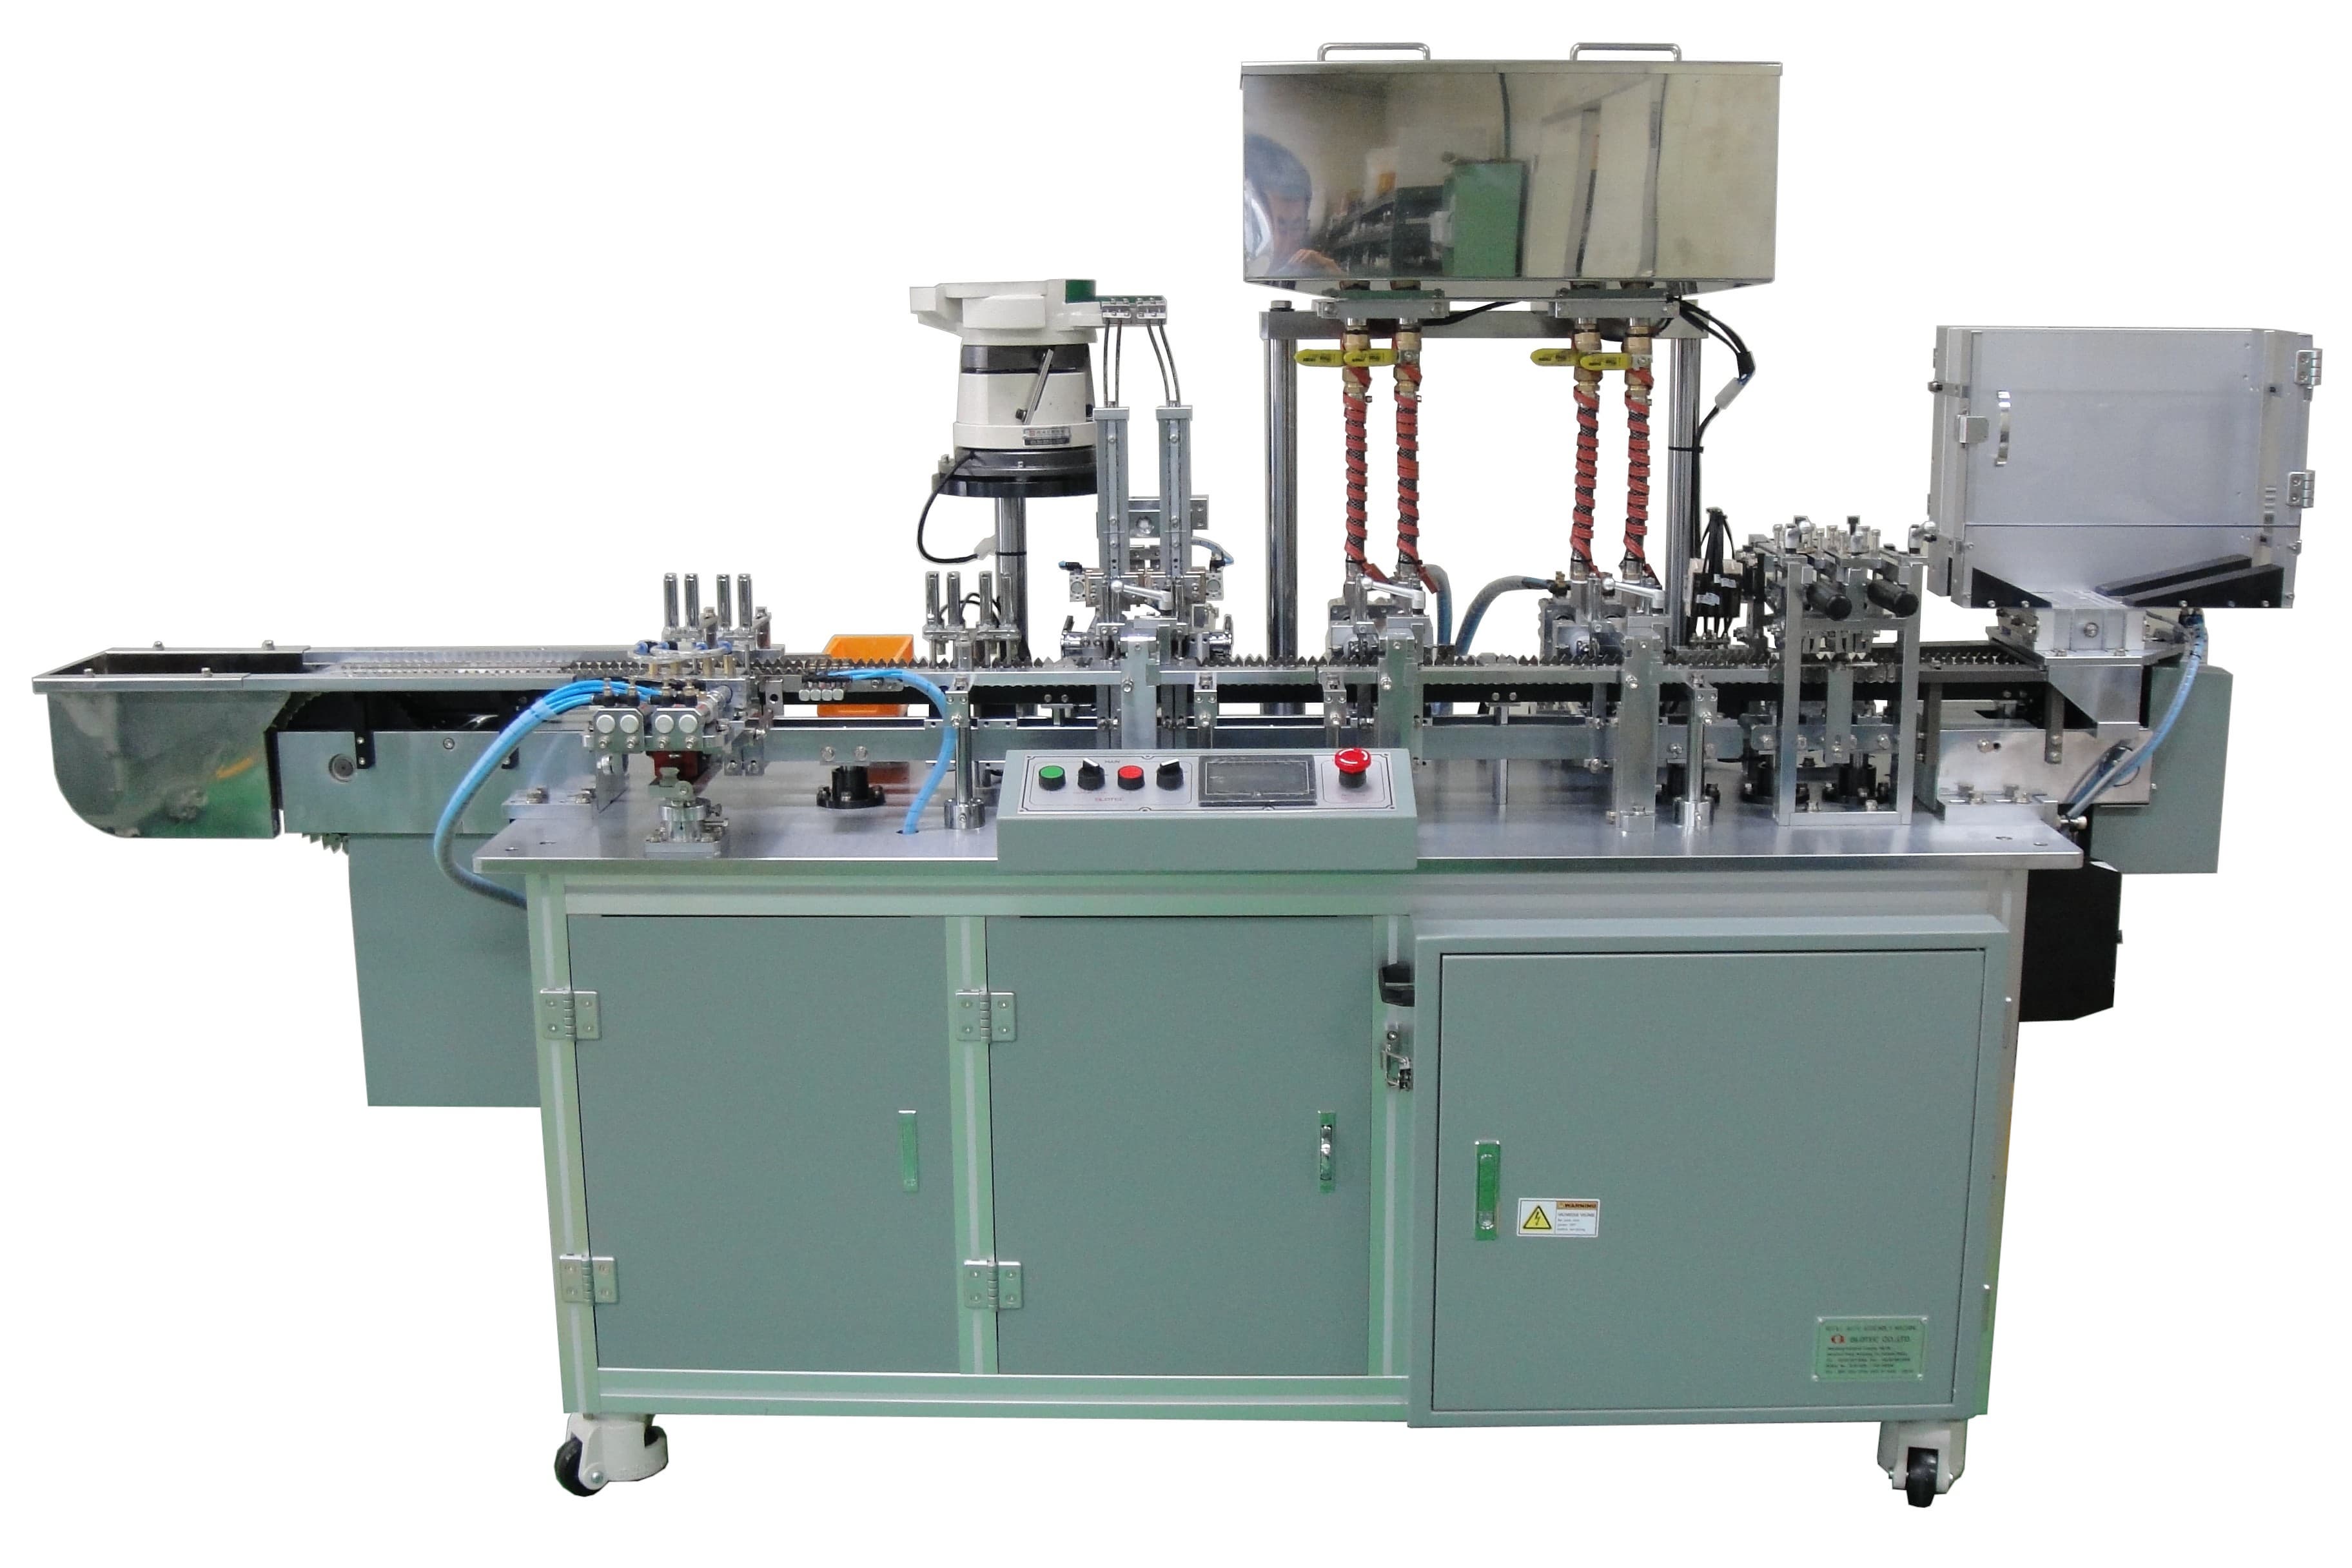 Oil refill assembly machine